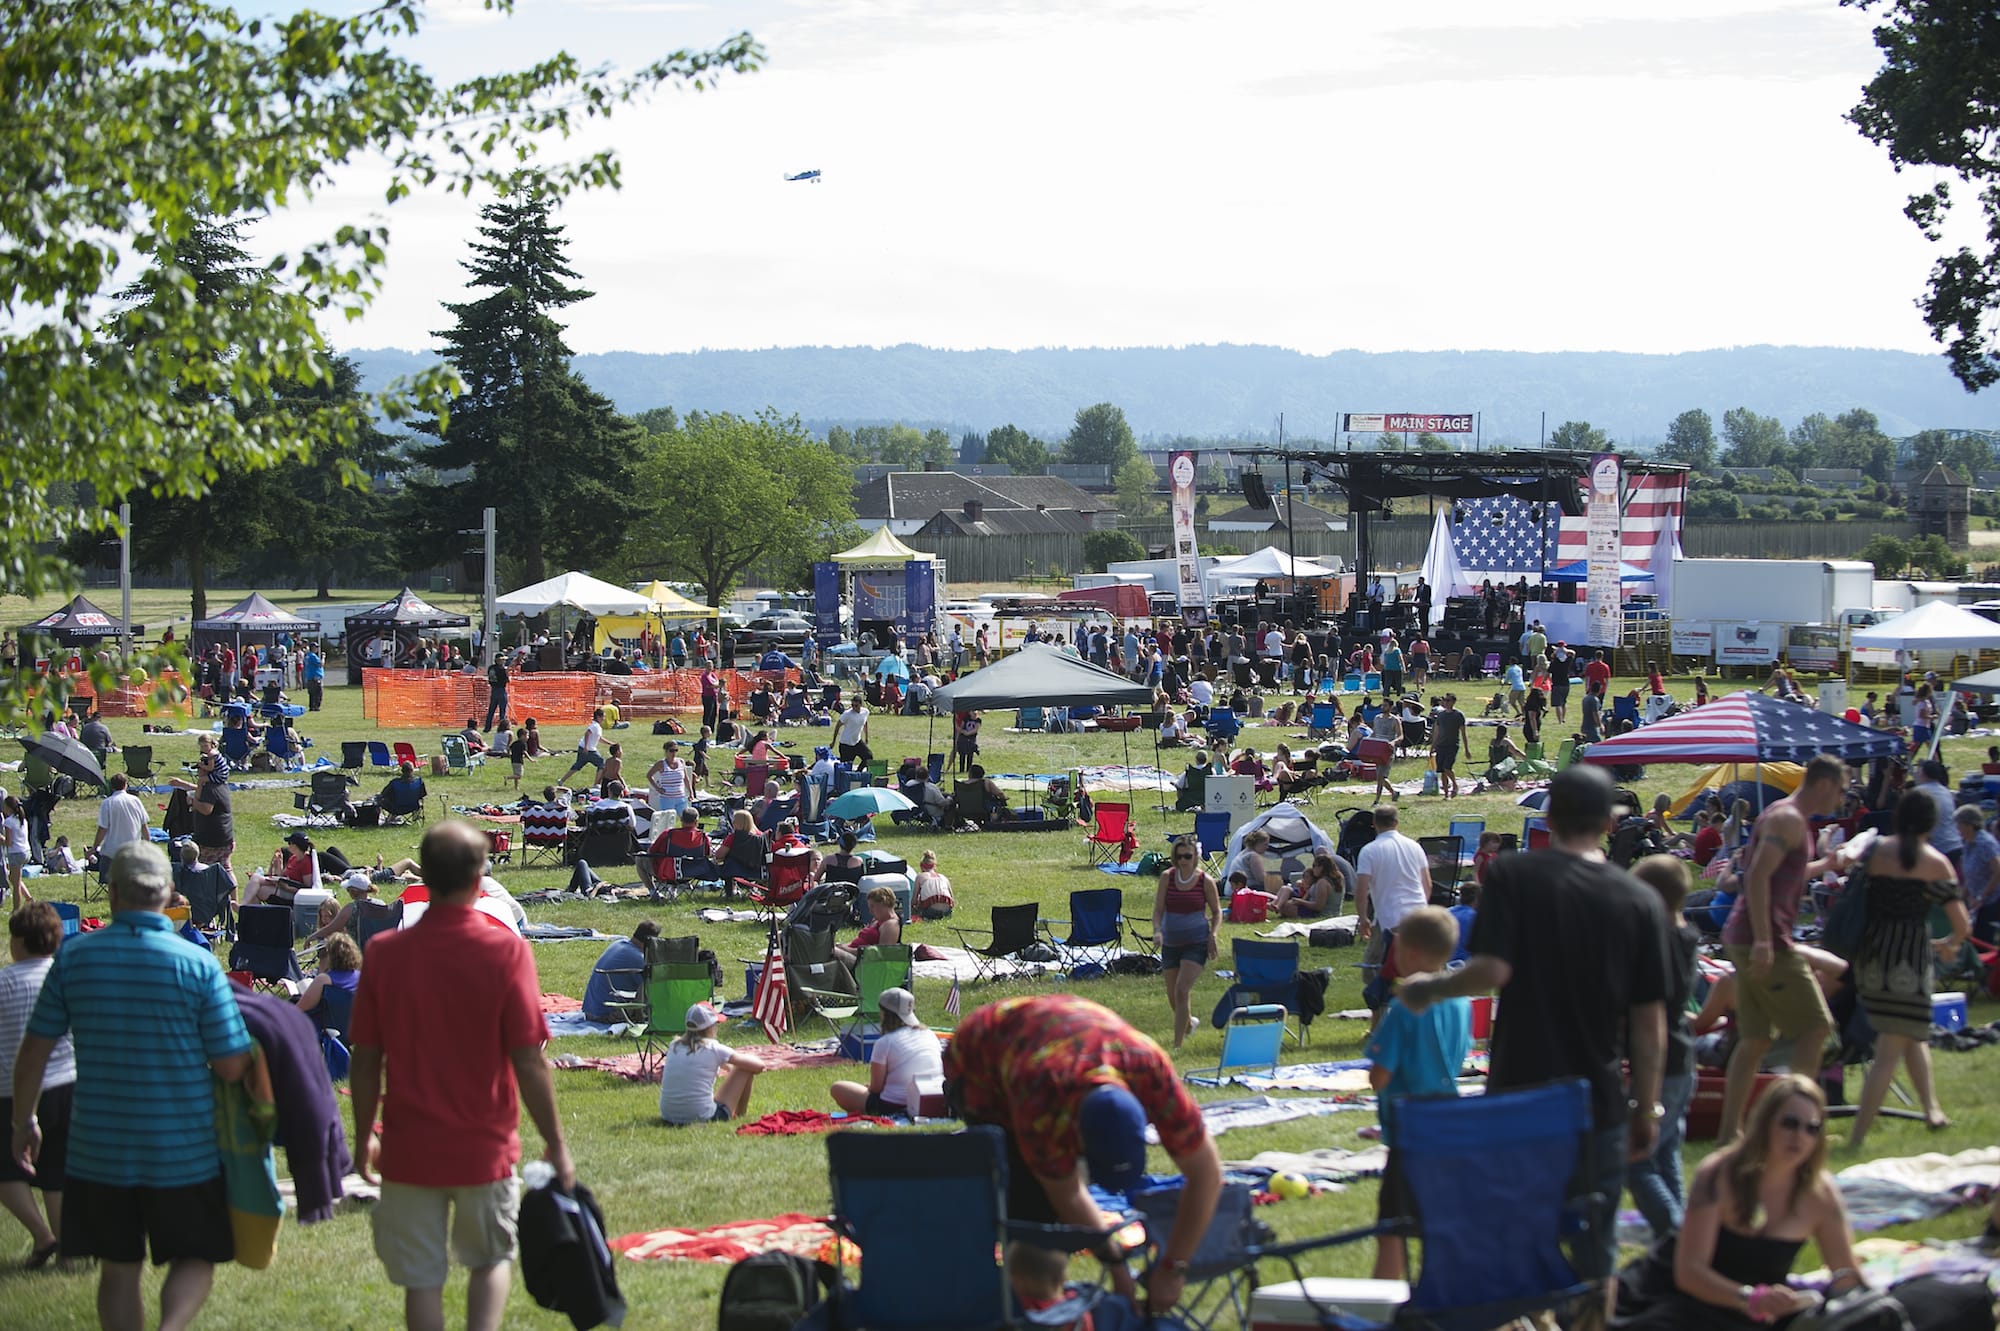 A crowd enjoys a sunny afternoon during the Fourth of July celebration at Fort Vancouver on July 4, 2014.